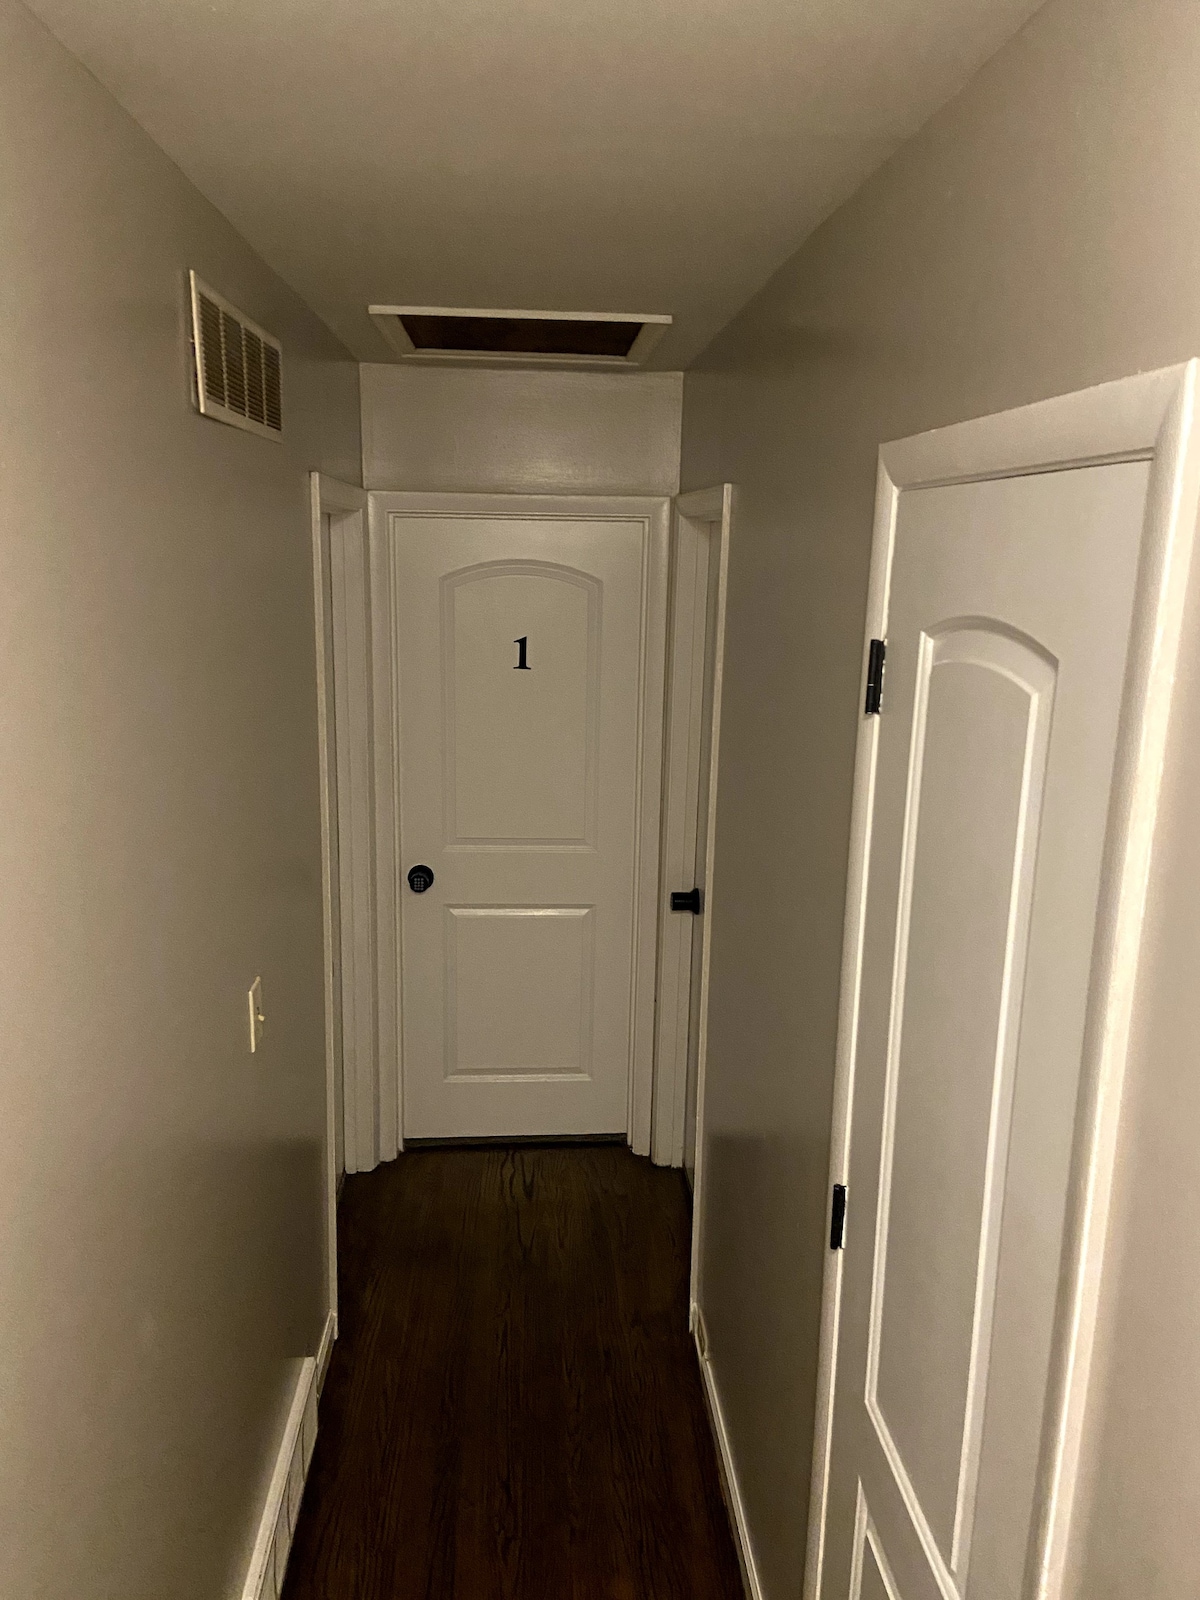 Spacious Private Room in 4BR Home - Self Checkin